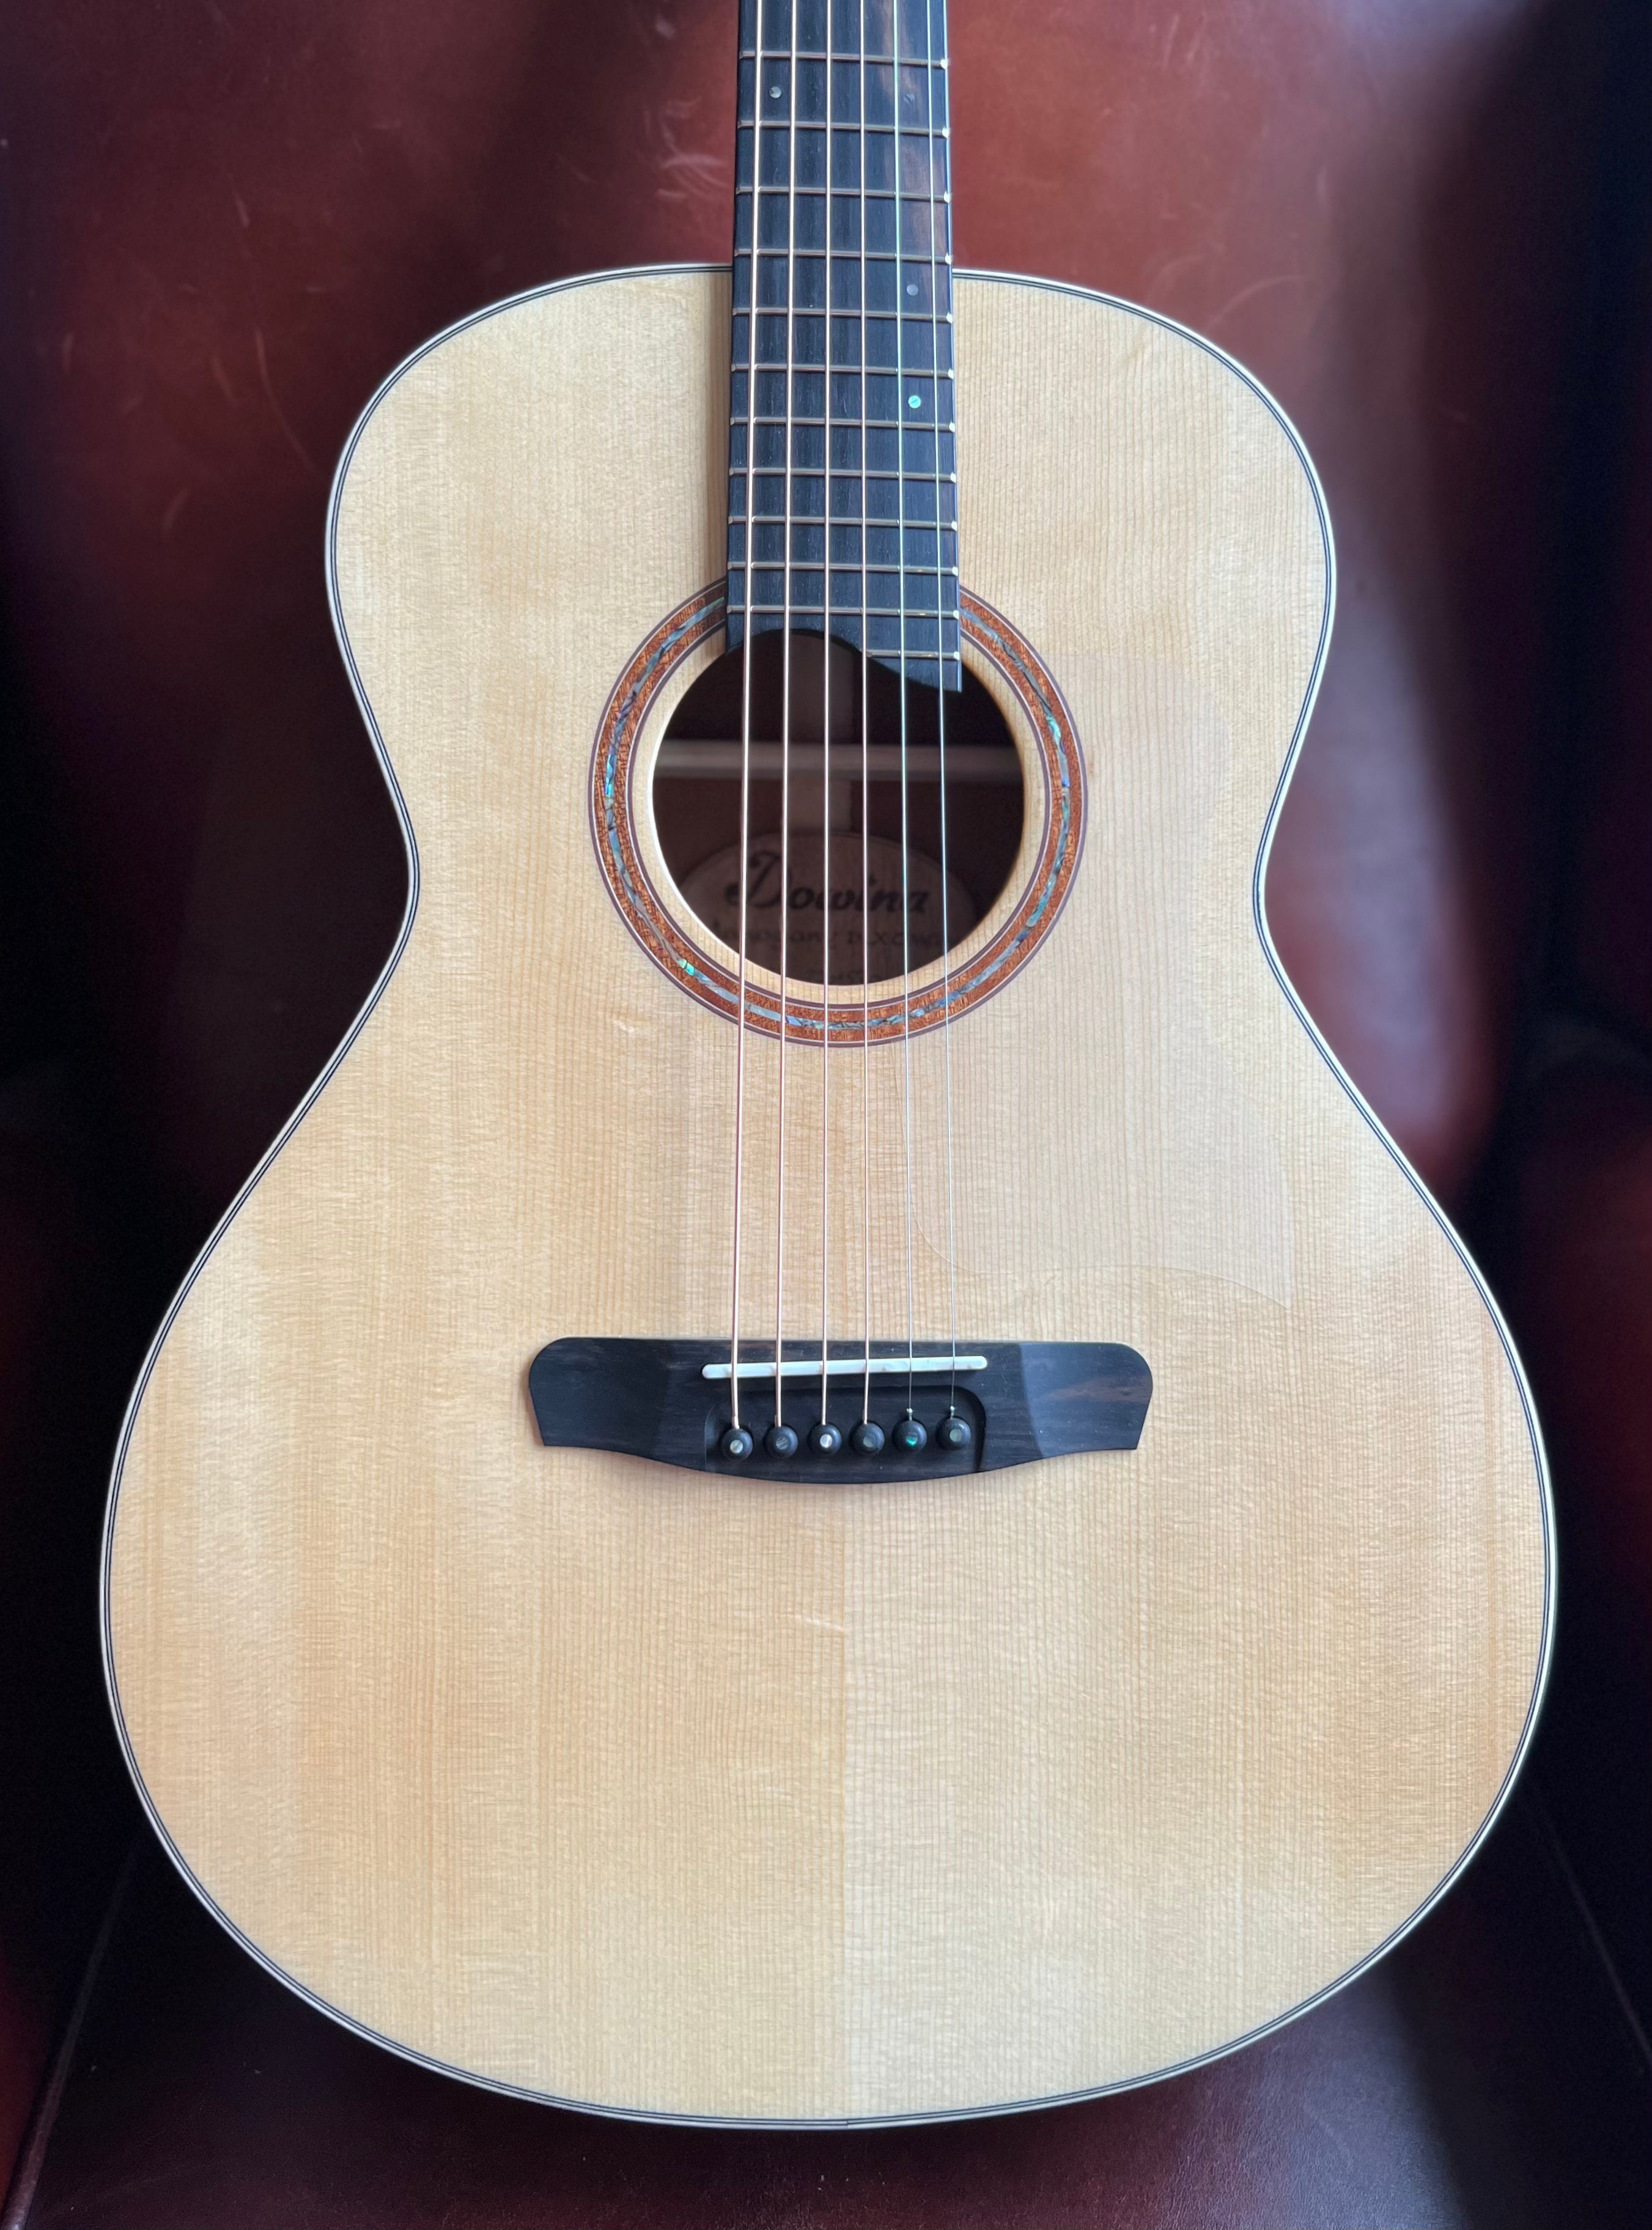 Dowina Mahogany OMG Deluxe-TSWS OM Body Acoustic Guitar, Acoustic Guitar for sale at Richards Guitars.